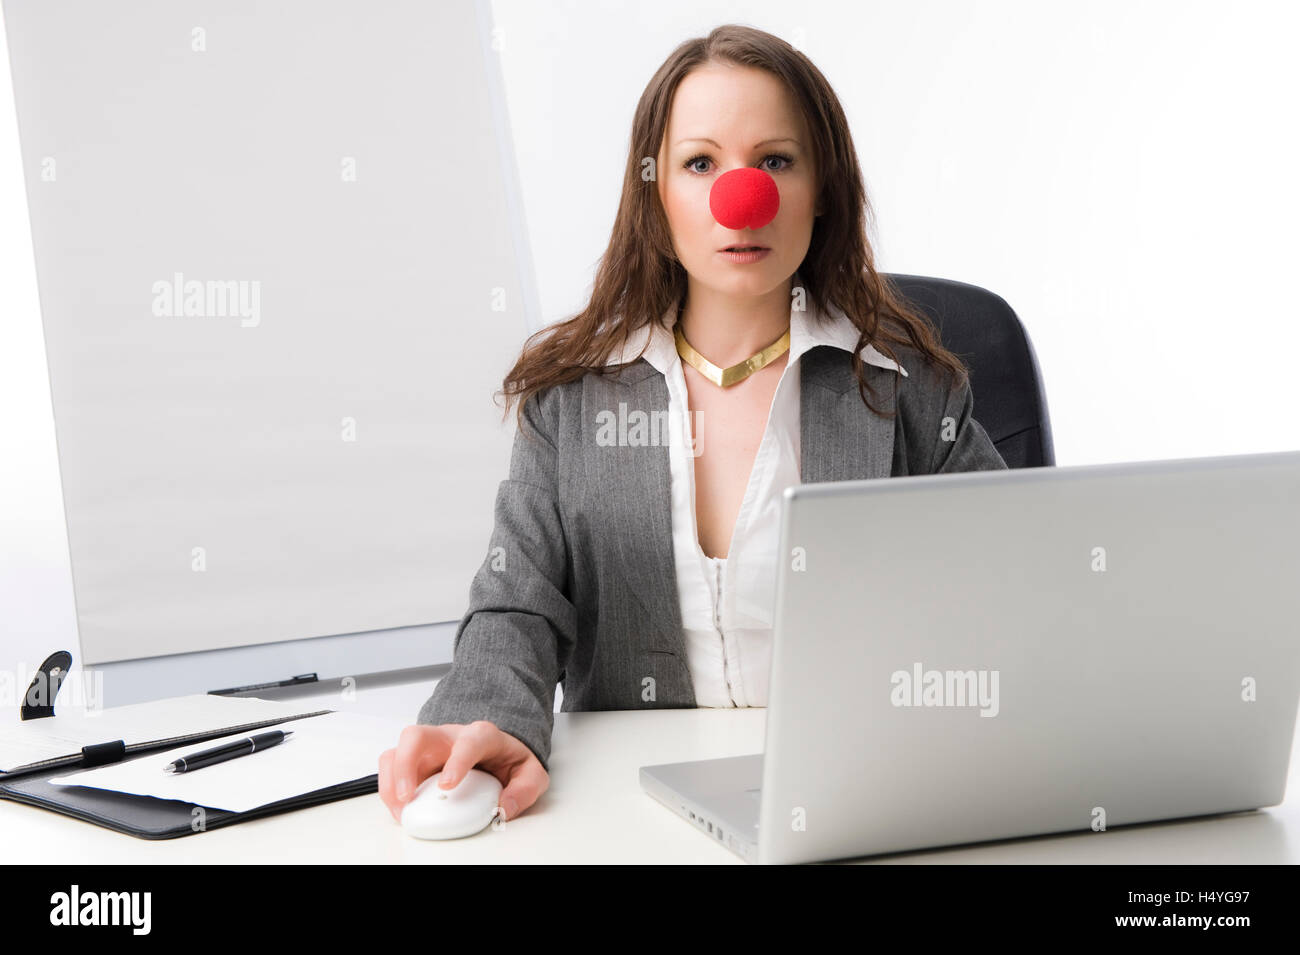 Business woman with a red clown nose Stock Photo